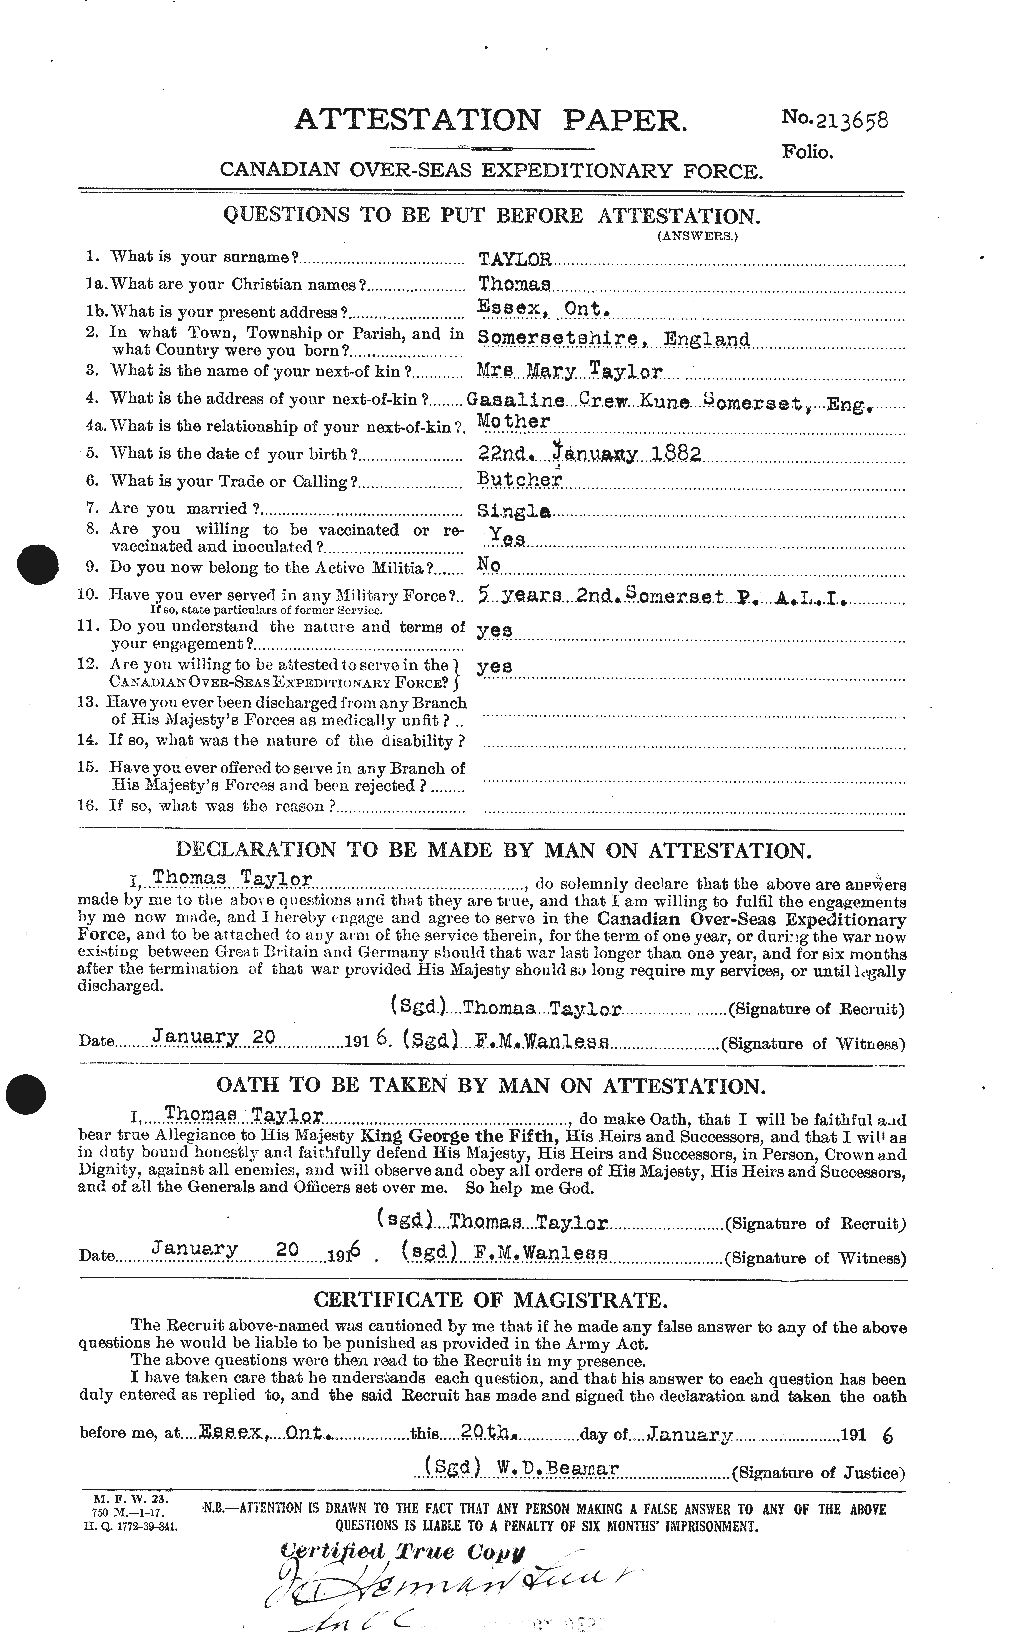 Personnel Records of the First World War - CEF 627946a